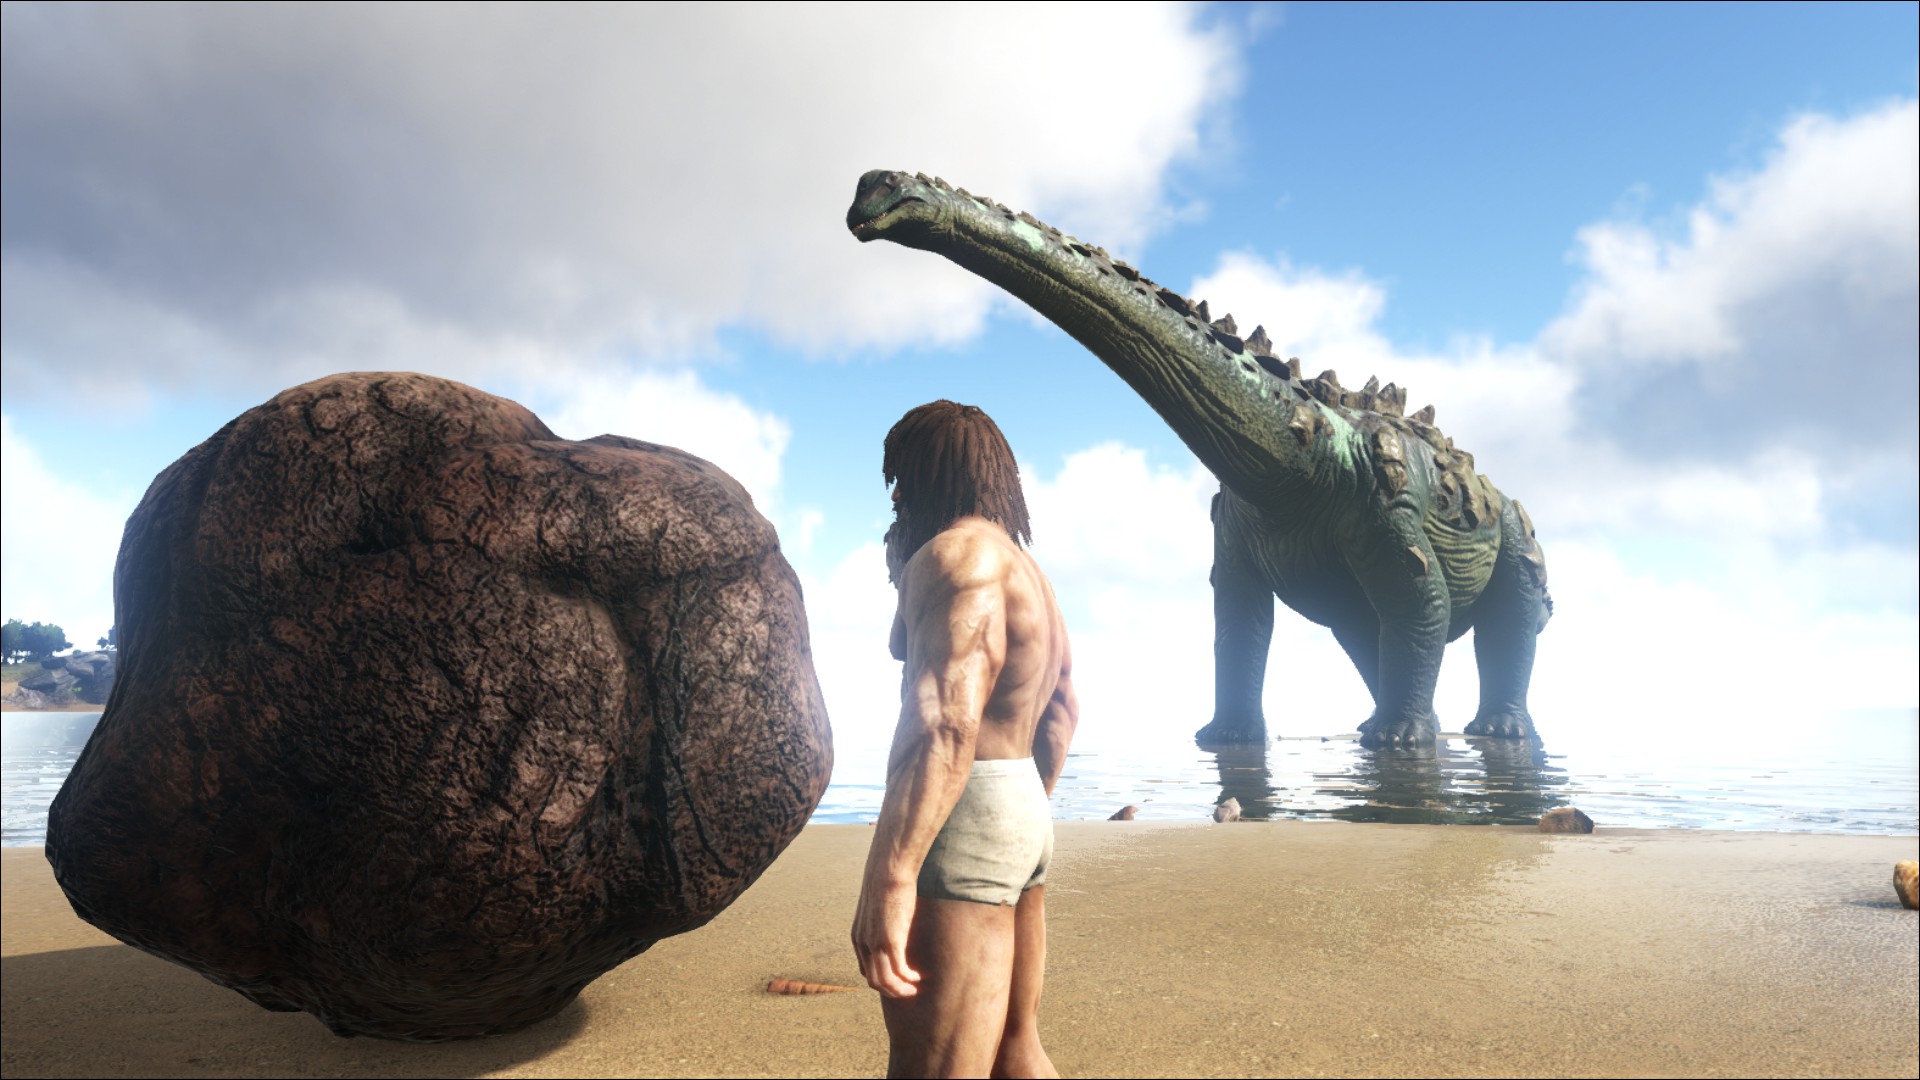 Poo: The Most Important Thing In Ark: Survival Evolved